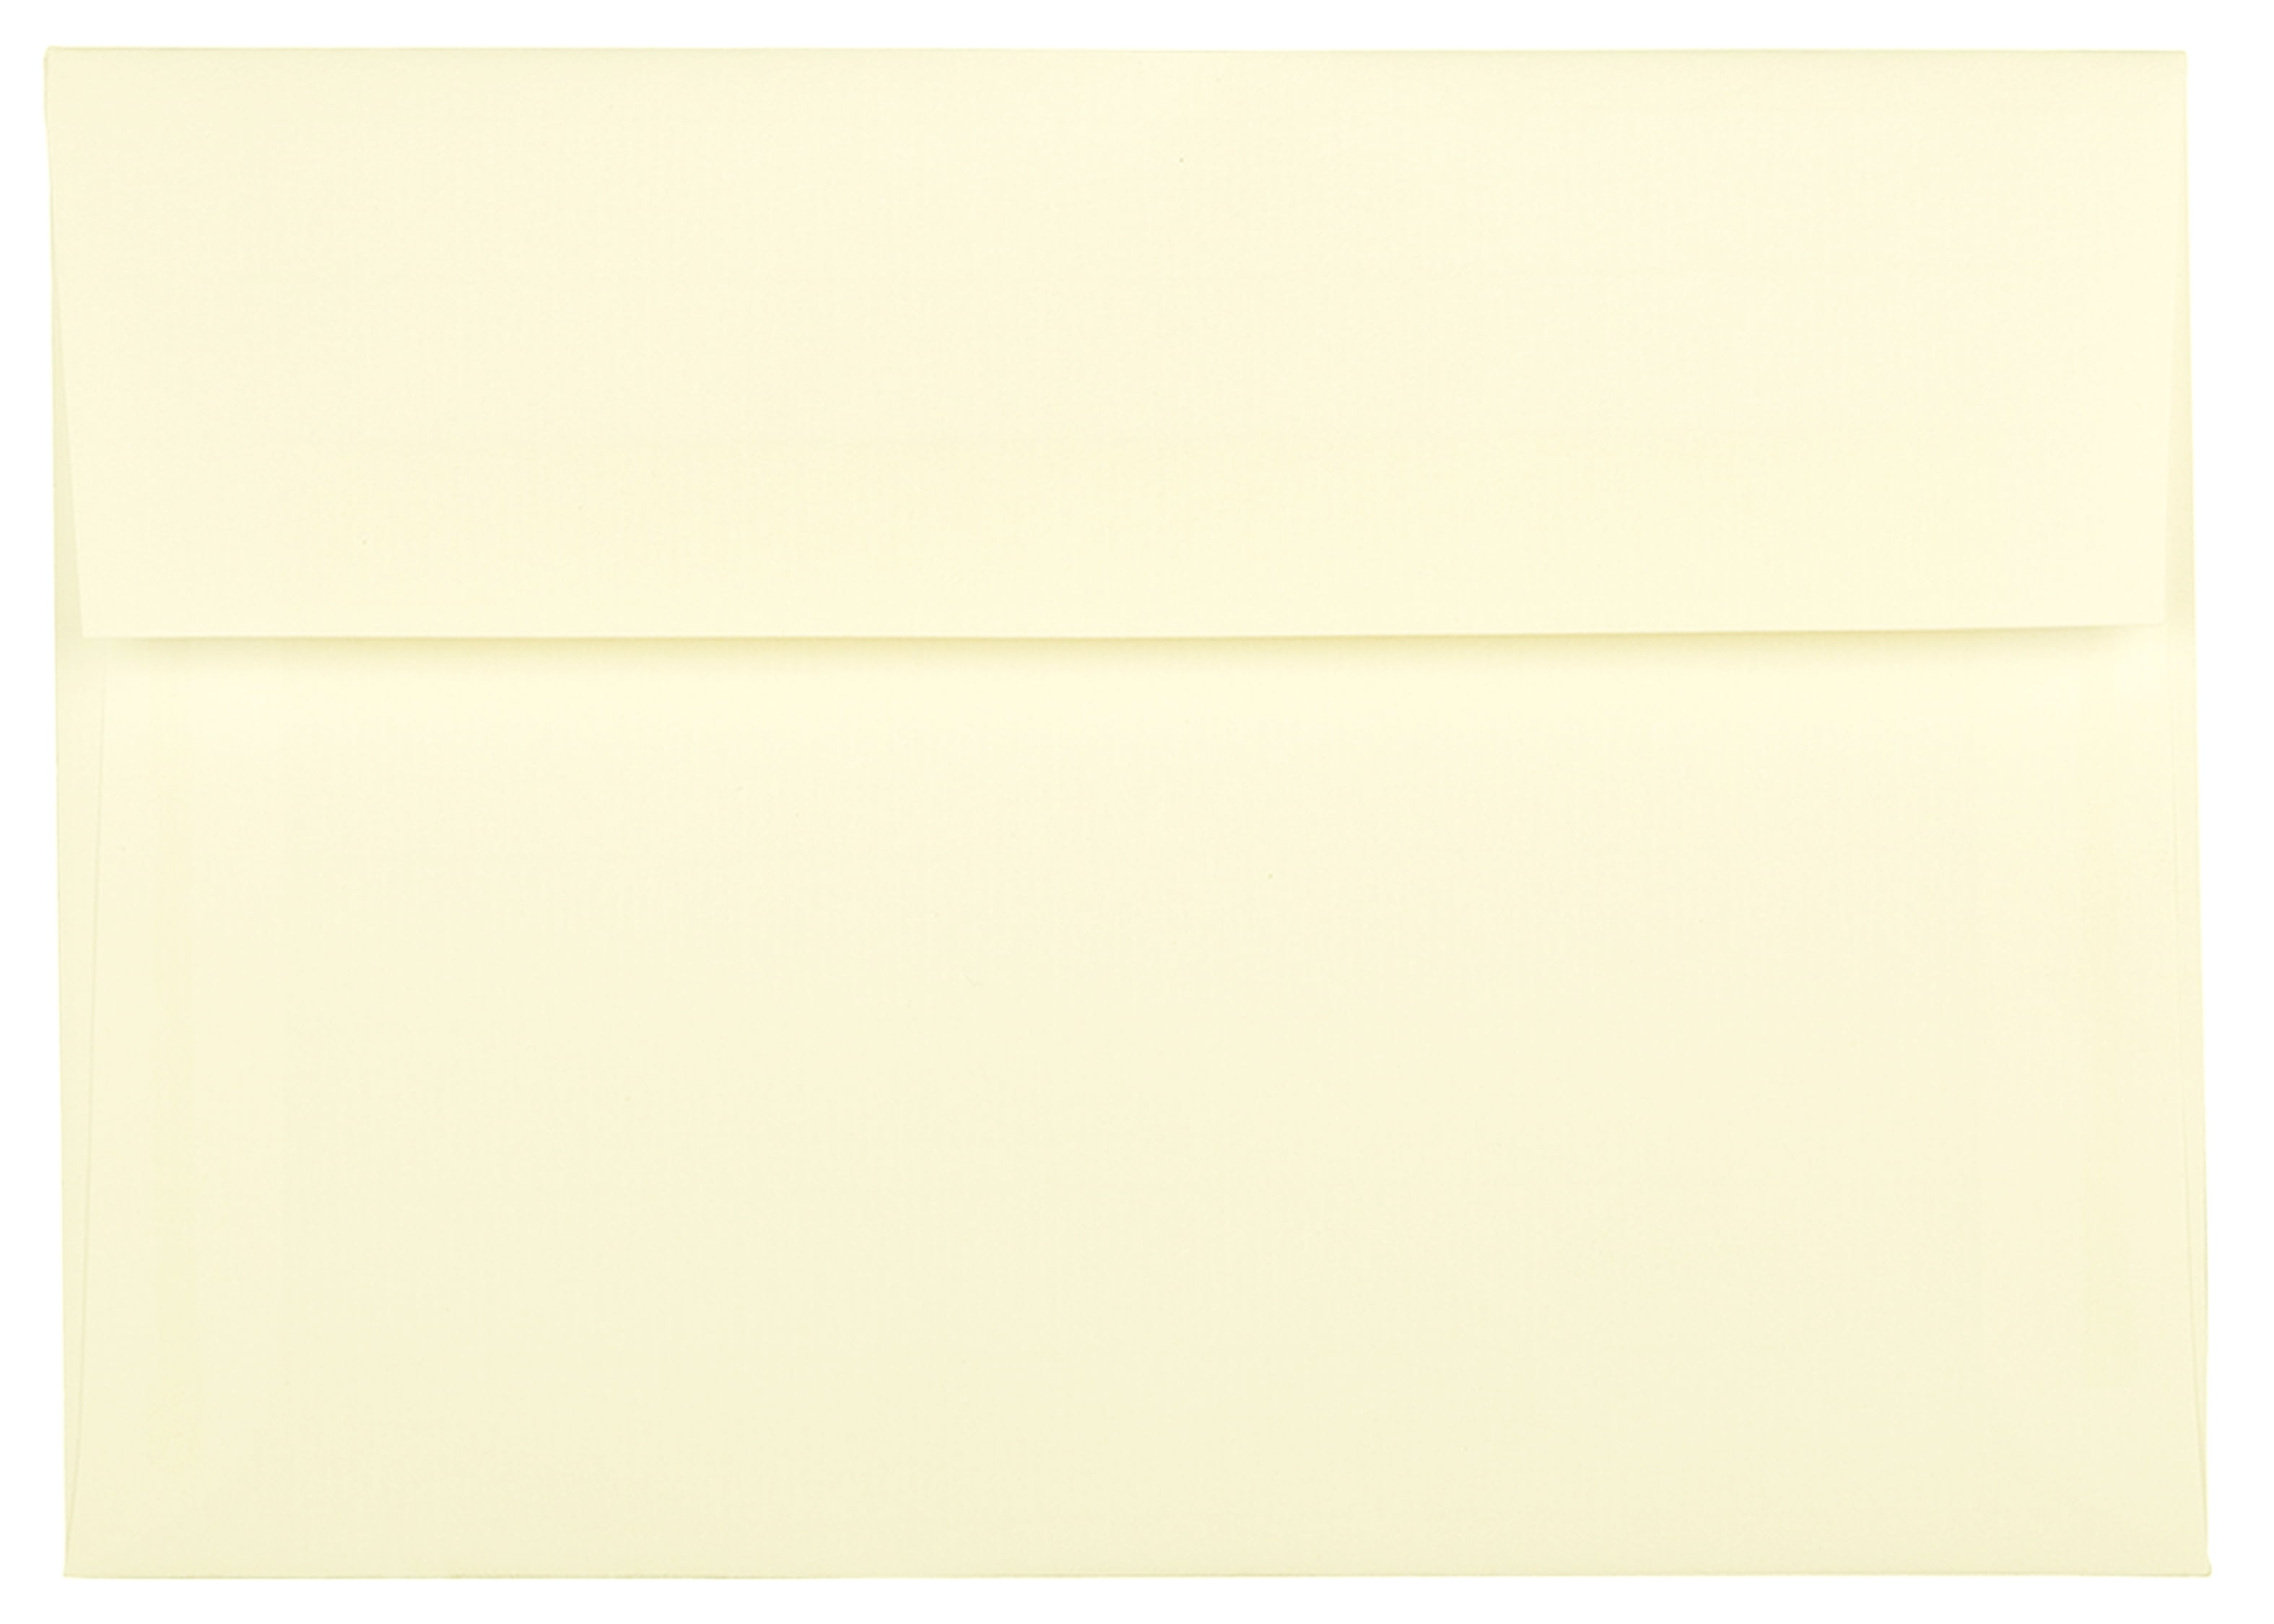 A7 White Envelopes for 5X7 Cards Invitation Announcements Photos Weddings Shower 